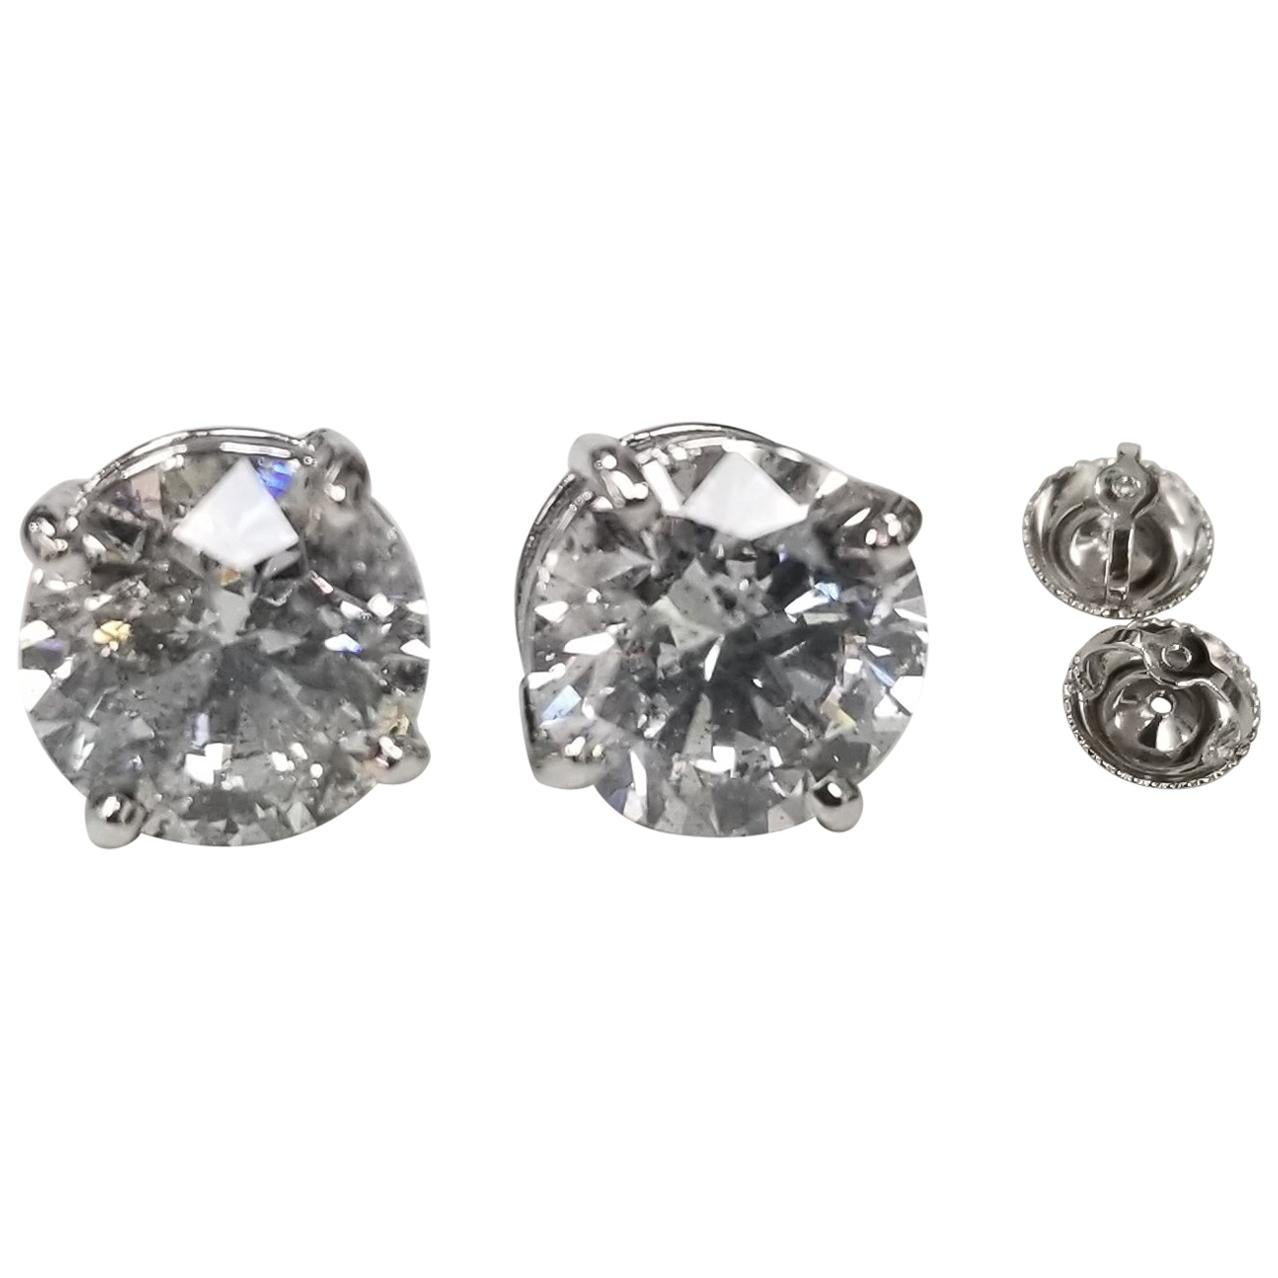 Studs 2 Brilliant Cut Diamonds, Color "G", Clarity SI3 and Weight 3.15 Carat